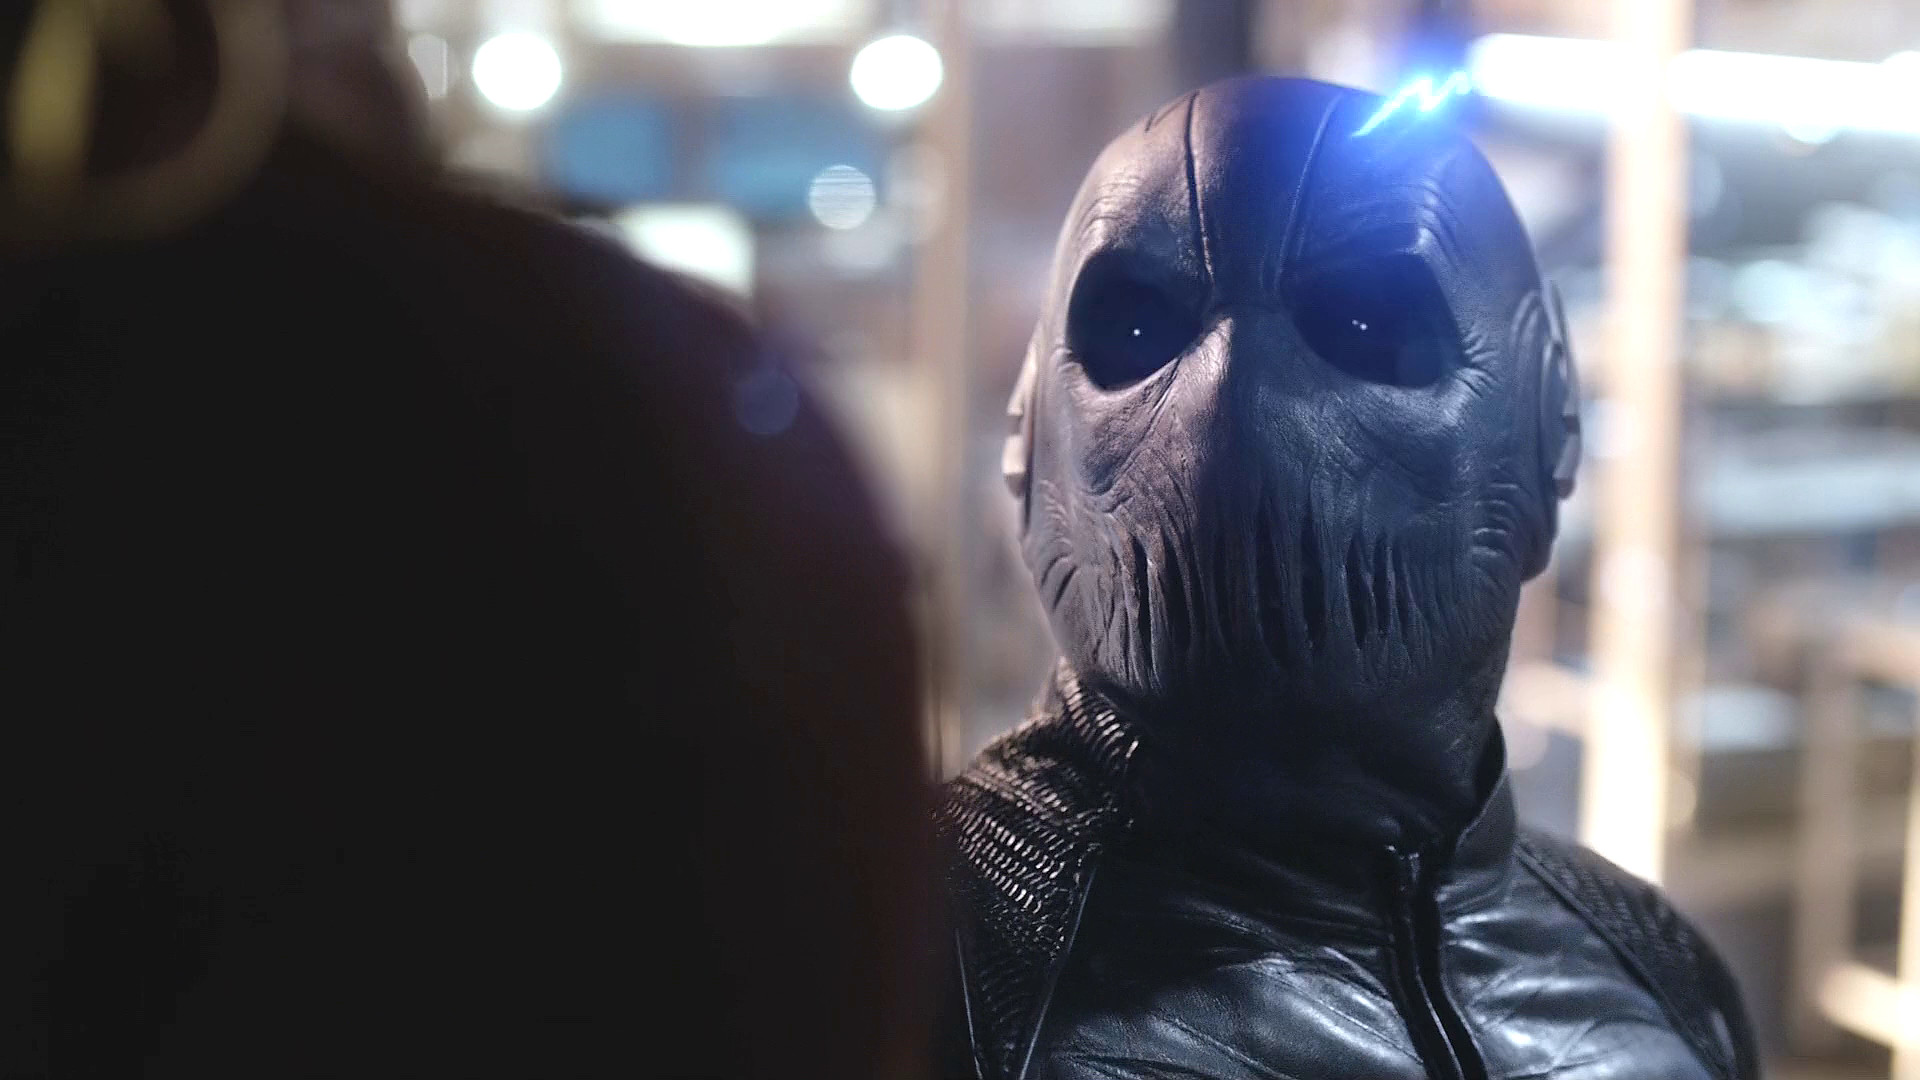 'The Flash' Reveals Zoom: What it Means for Our Heroes